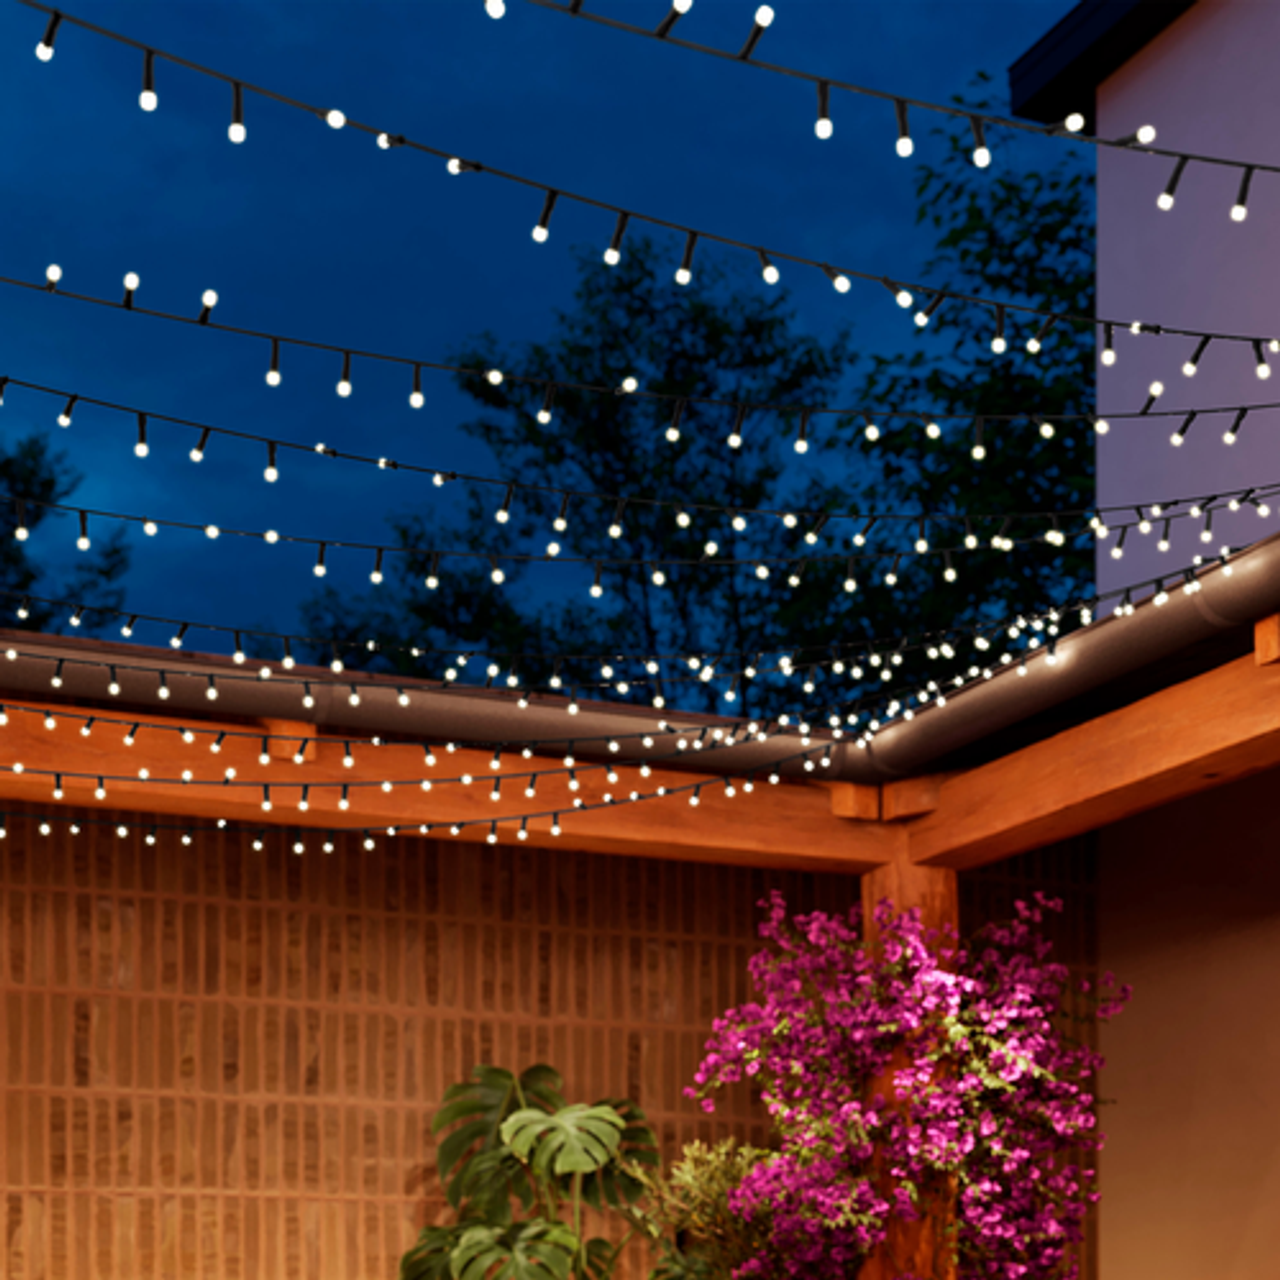 Philips - Hue Festavia 130-Foot 500-LED Smart String Lights - White and Color Ambiance